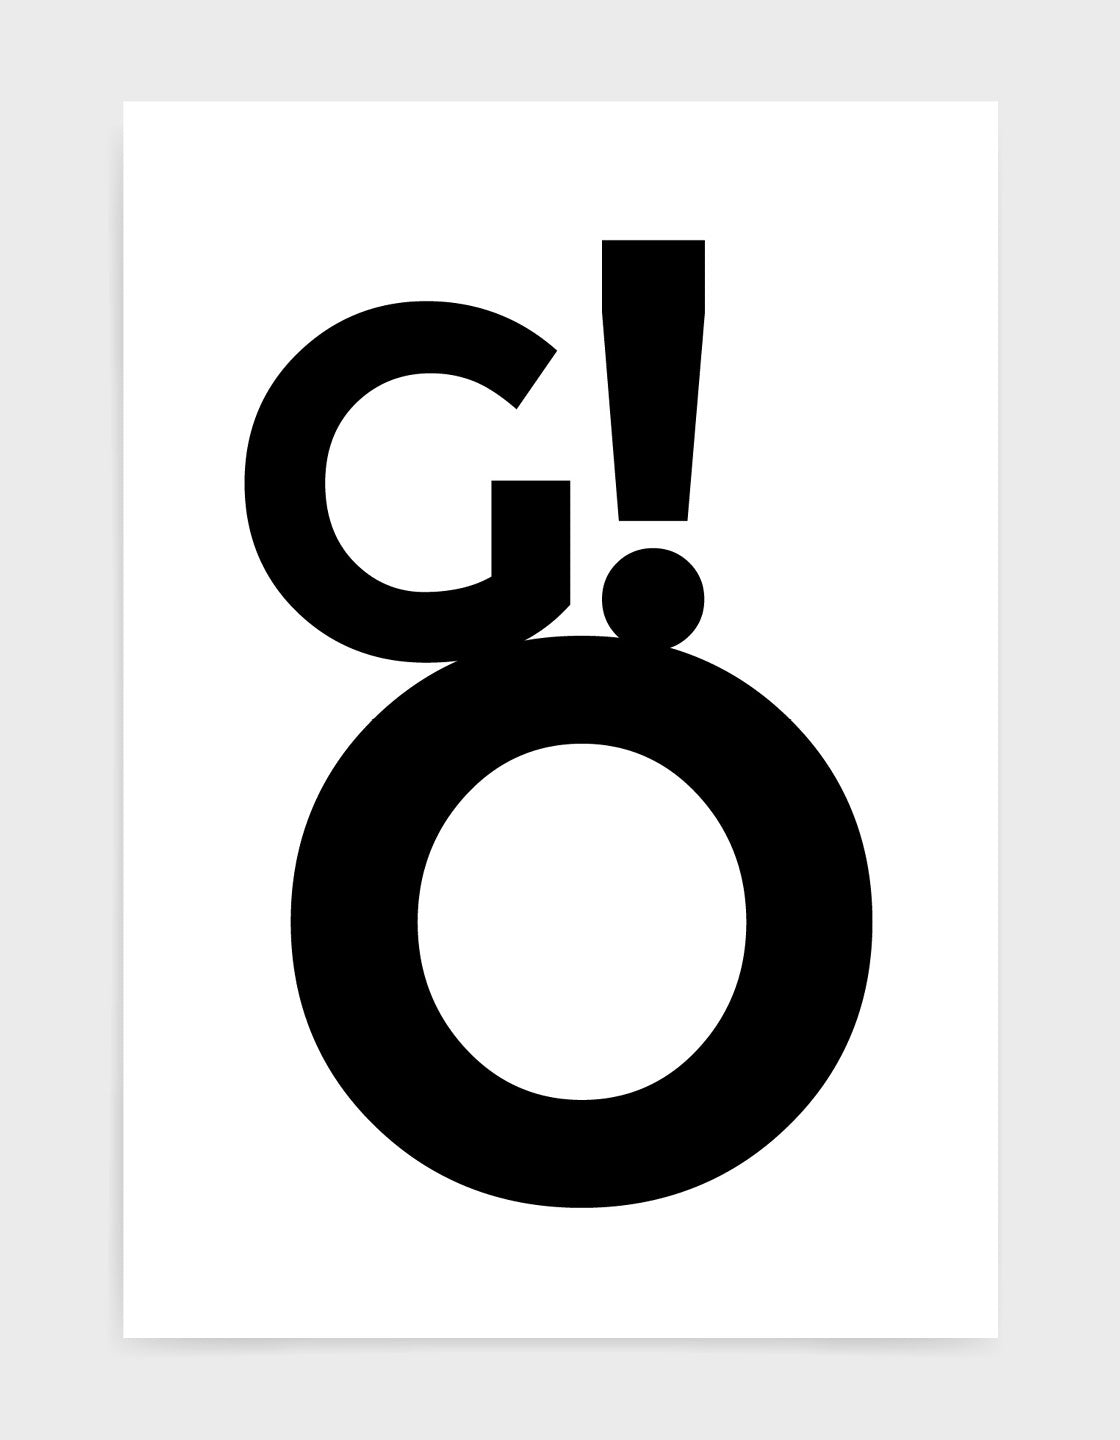 typography art print with Go! in black against a white background